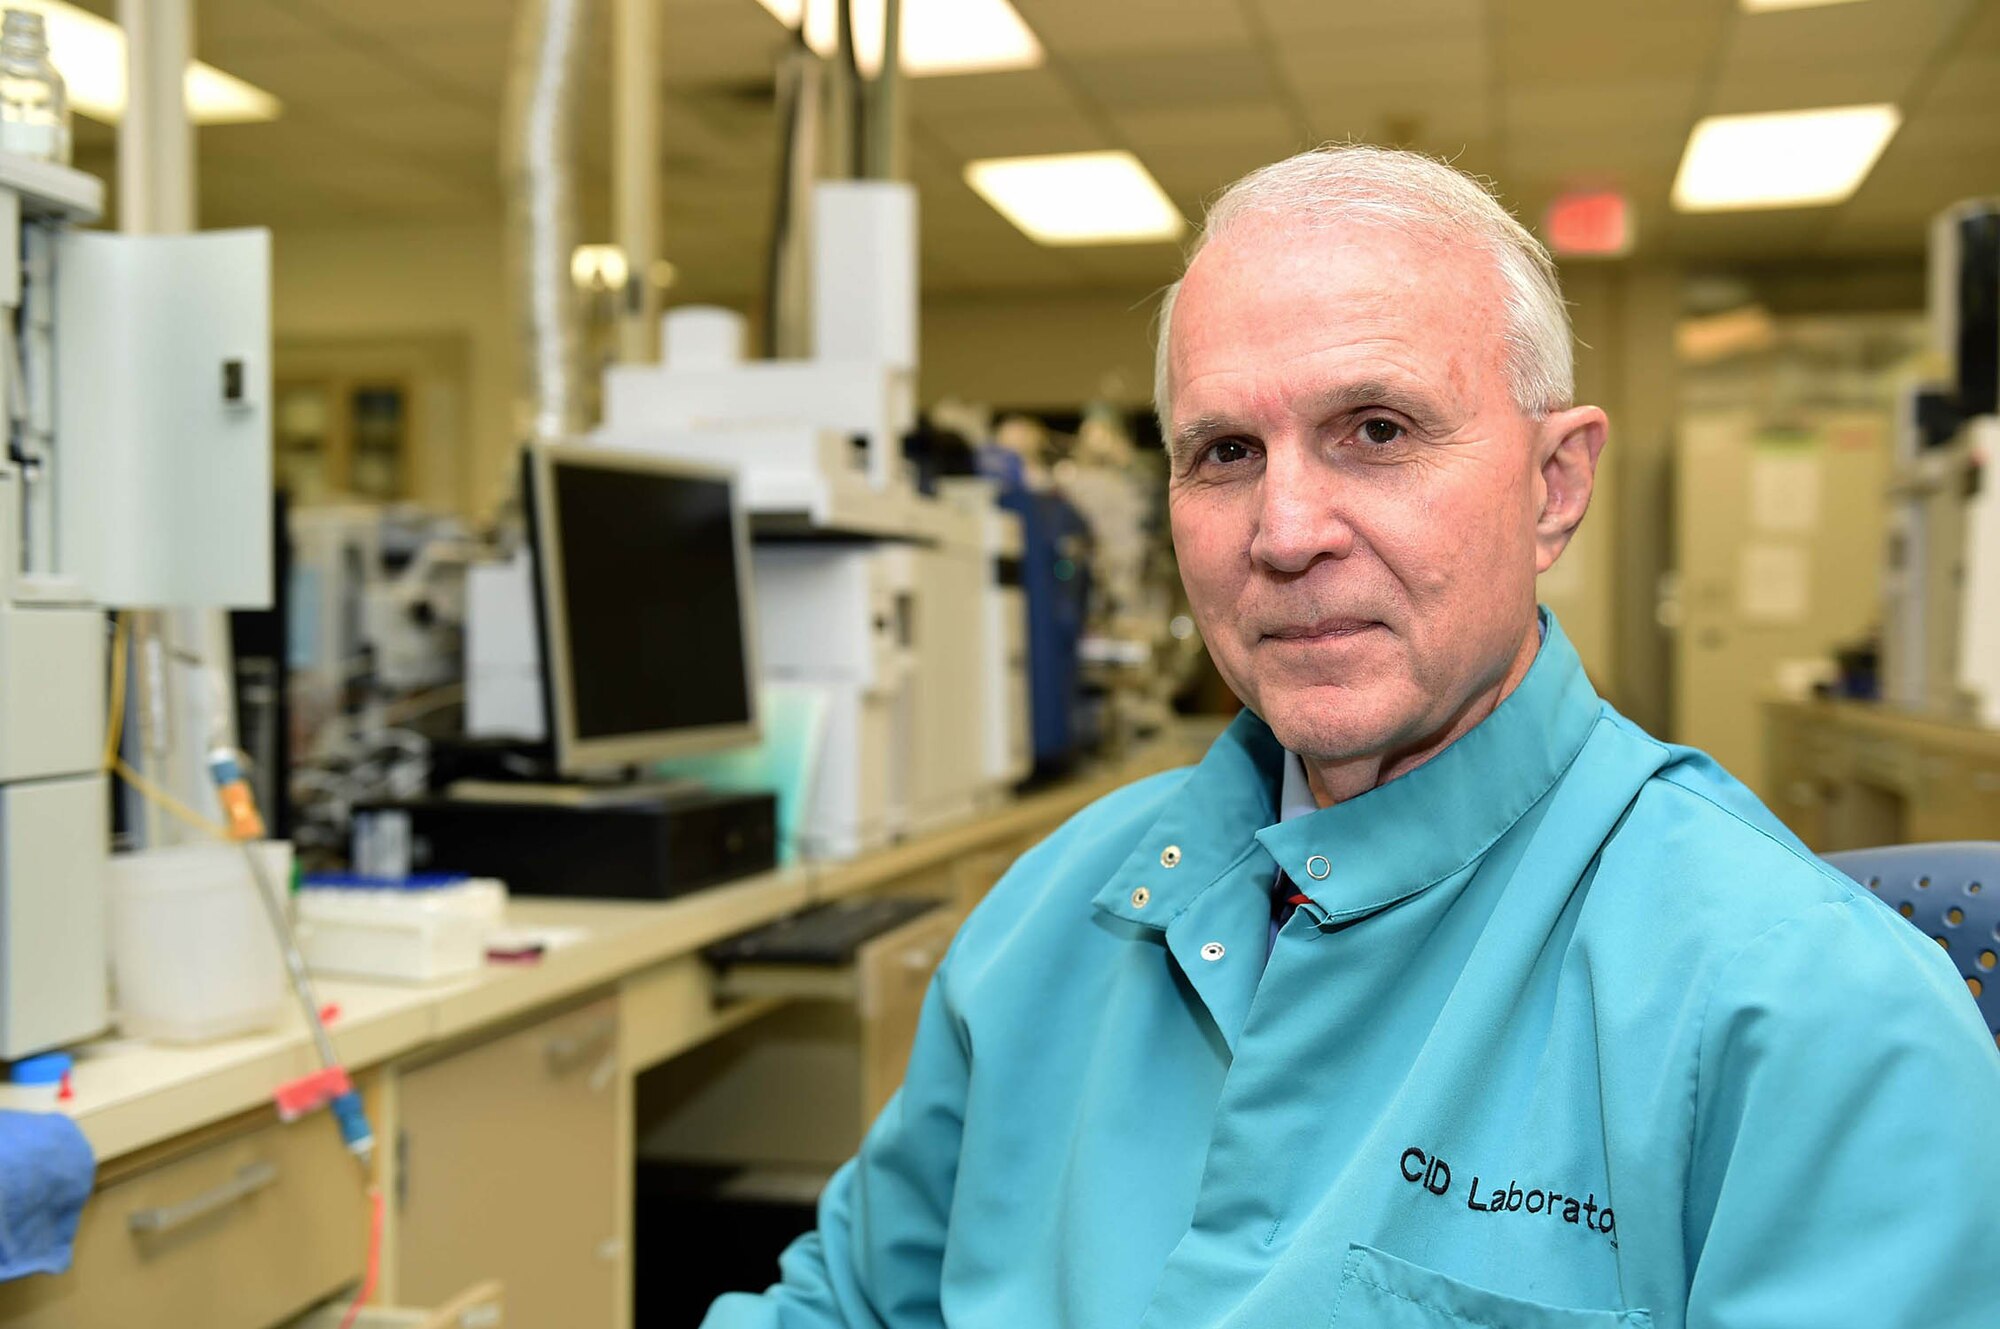 David McGlasson, a clinical research scientist with the 59th Medical Wing’s Clinical Research Division on Joint Base San Antonio-Lackland, Texas, was named the American Society for Clinical Laboratory Science’s Scientific Researcher of the Year Award for 2015. (U.S. Air Force photo by Staff Sgt. Jerilyn Quintanilla) 